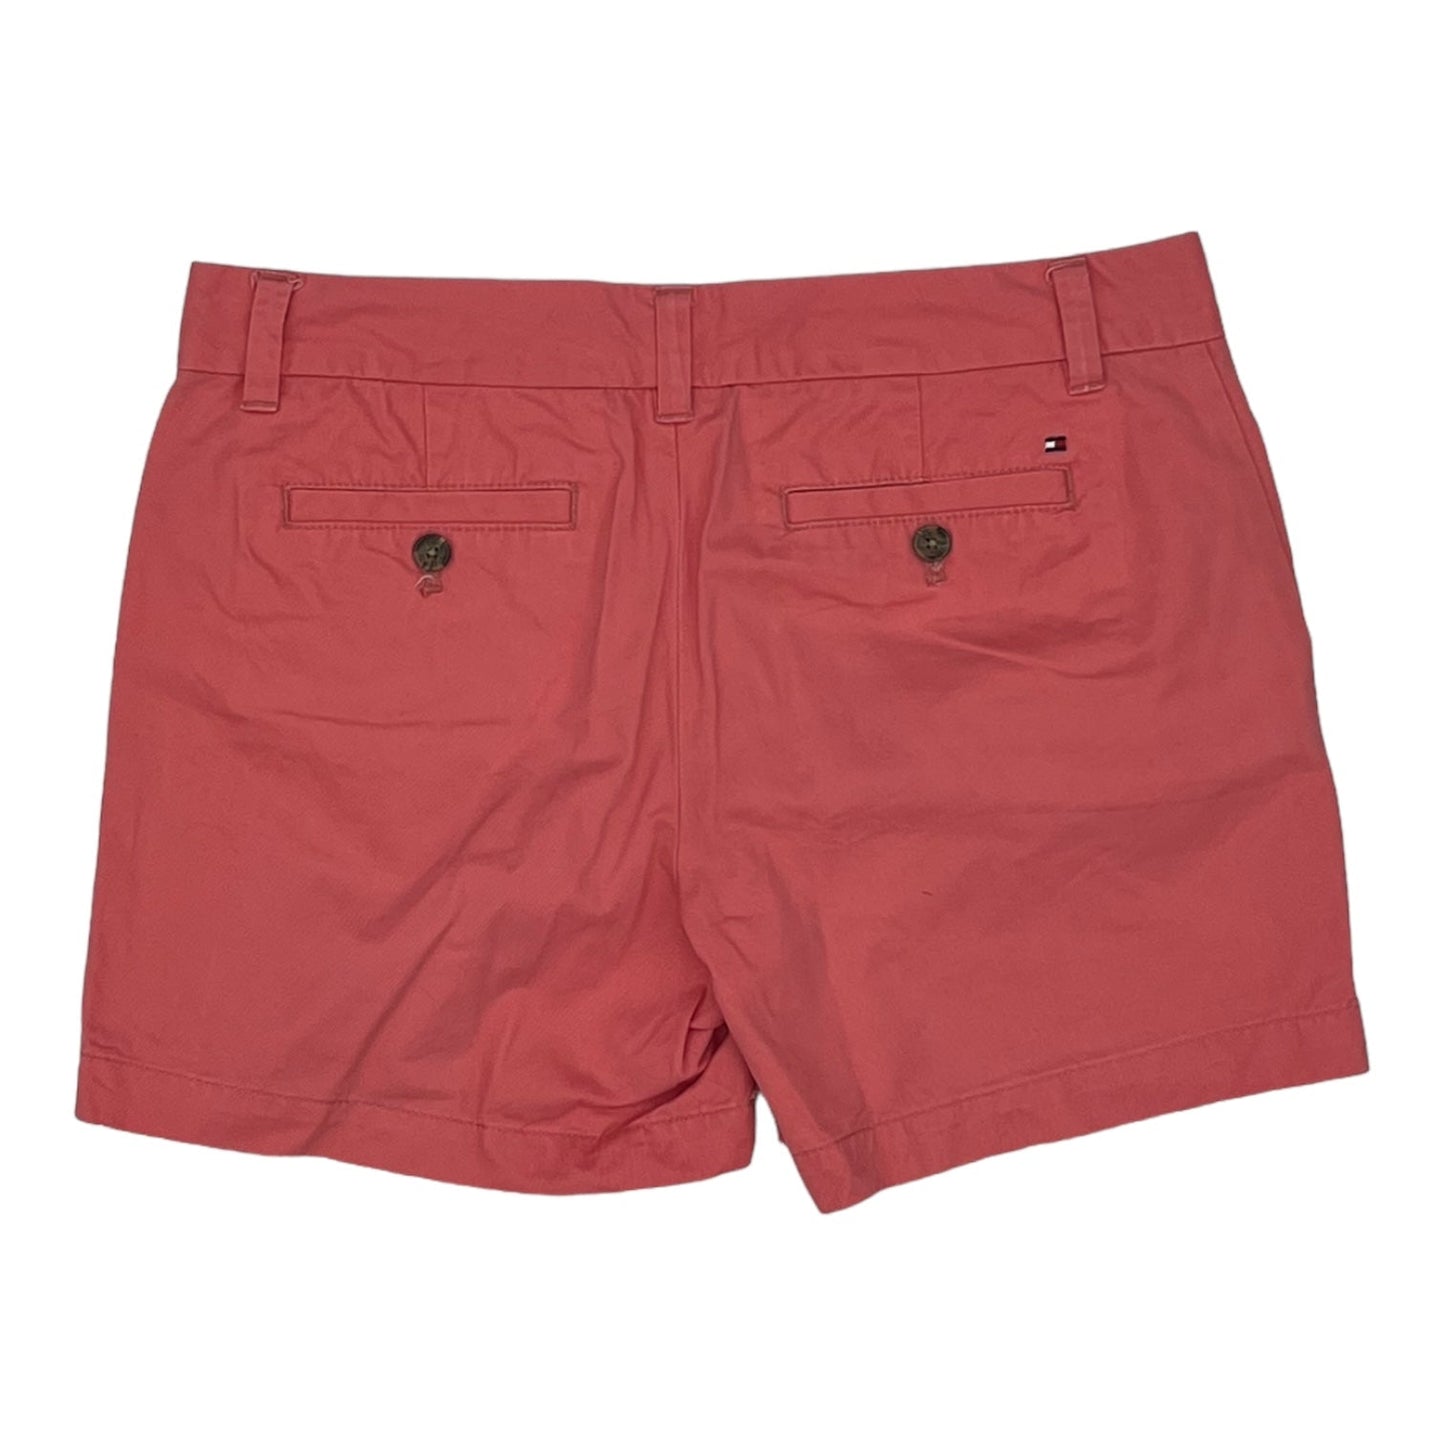 CORAL TOMMY HILFIGER SHORTS, Size 6